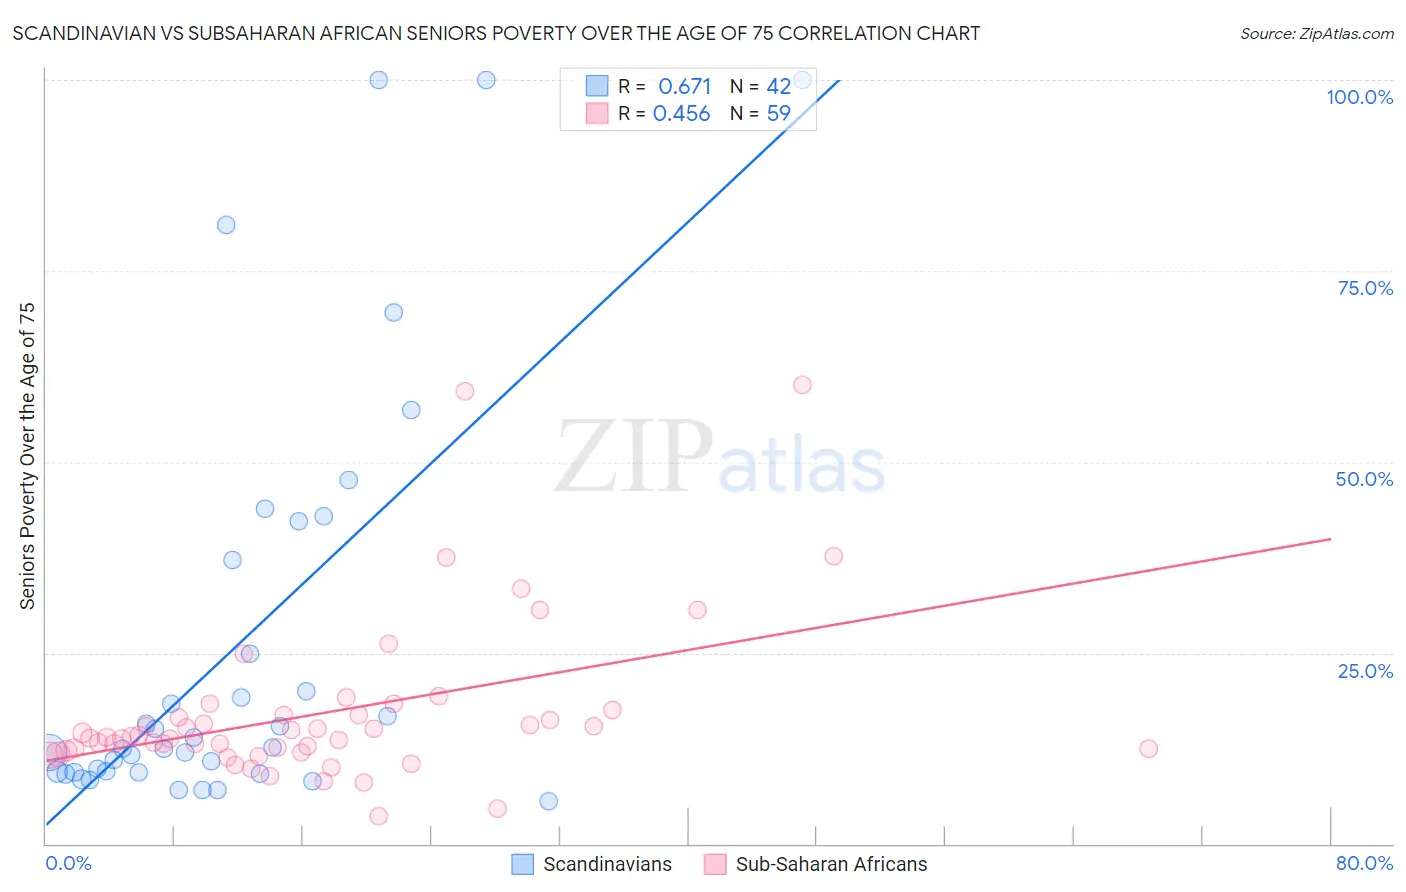 Scandinavian vs Subsaharan African Seniors Poverty Over the Age of 75